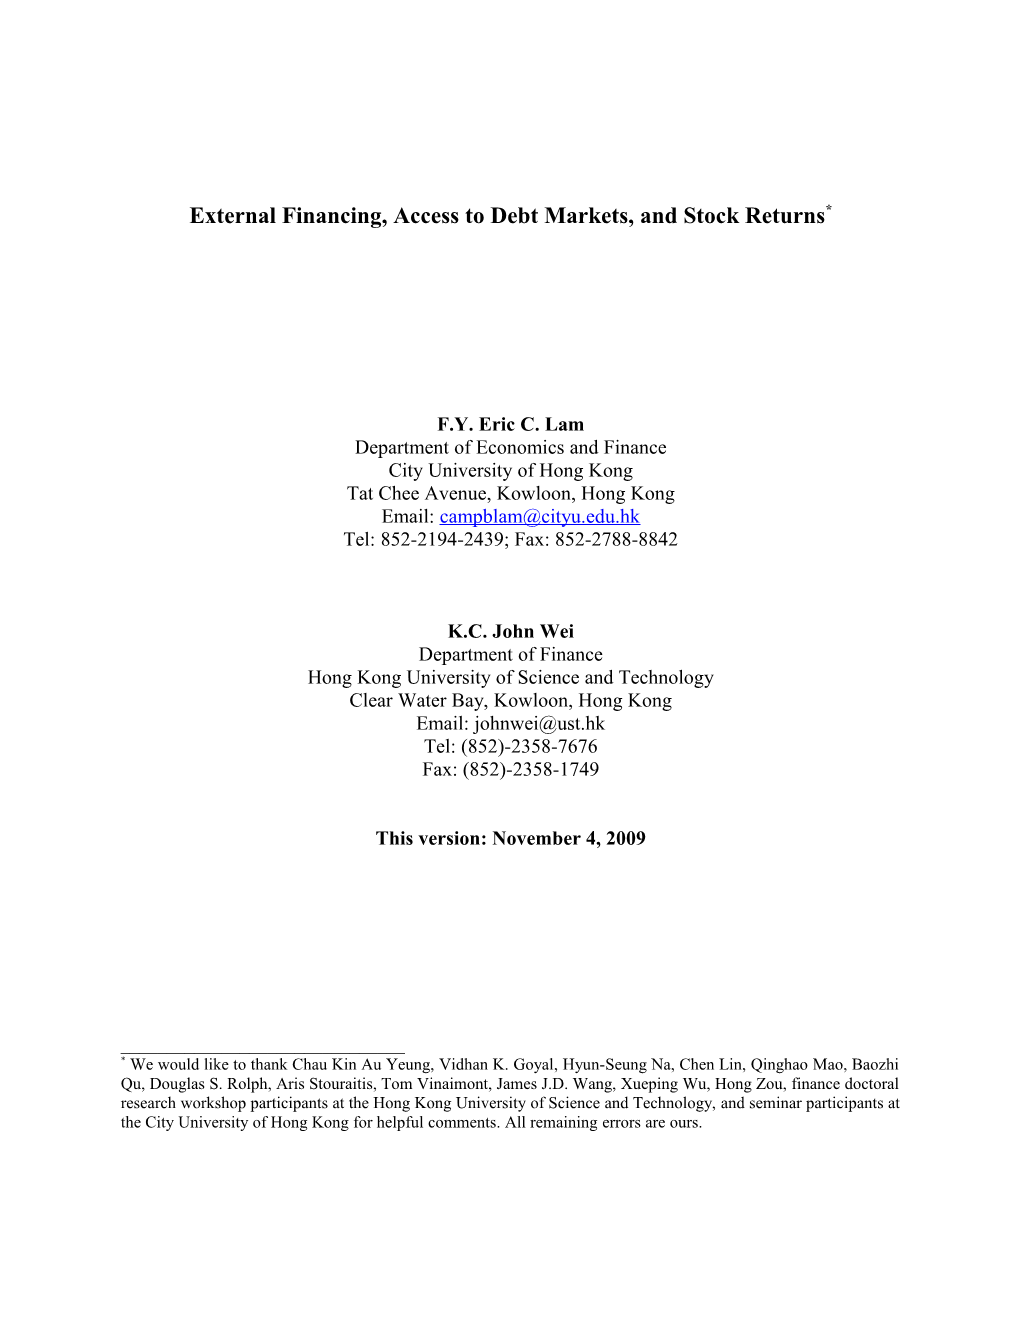 External Financing, Misvaluation Timing, and Stock Returns*